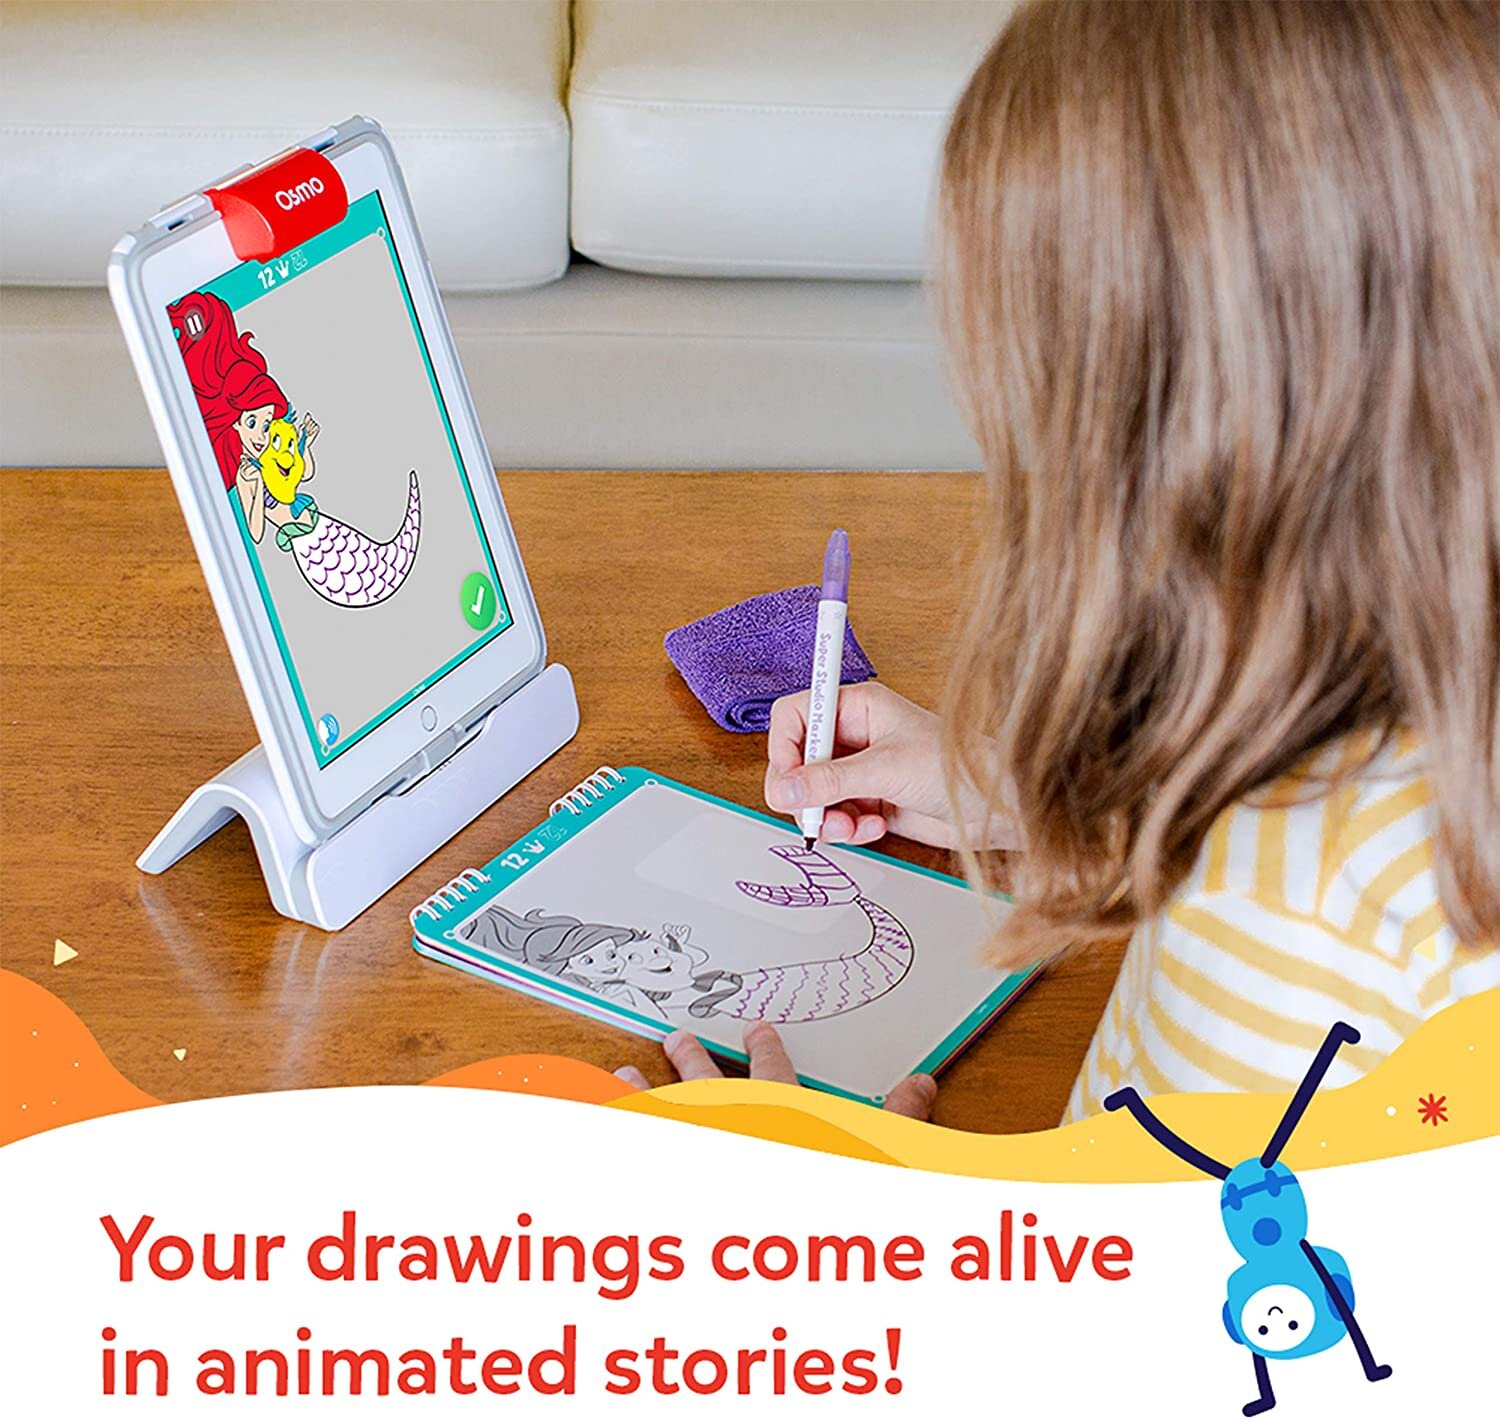 Super Studio Your drawings come alive by Osmo Disney Princess  #5607 